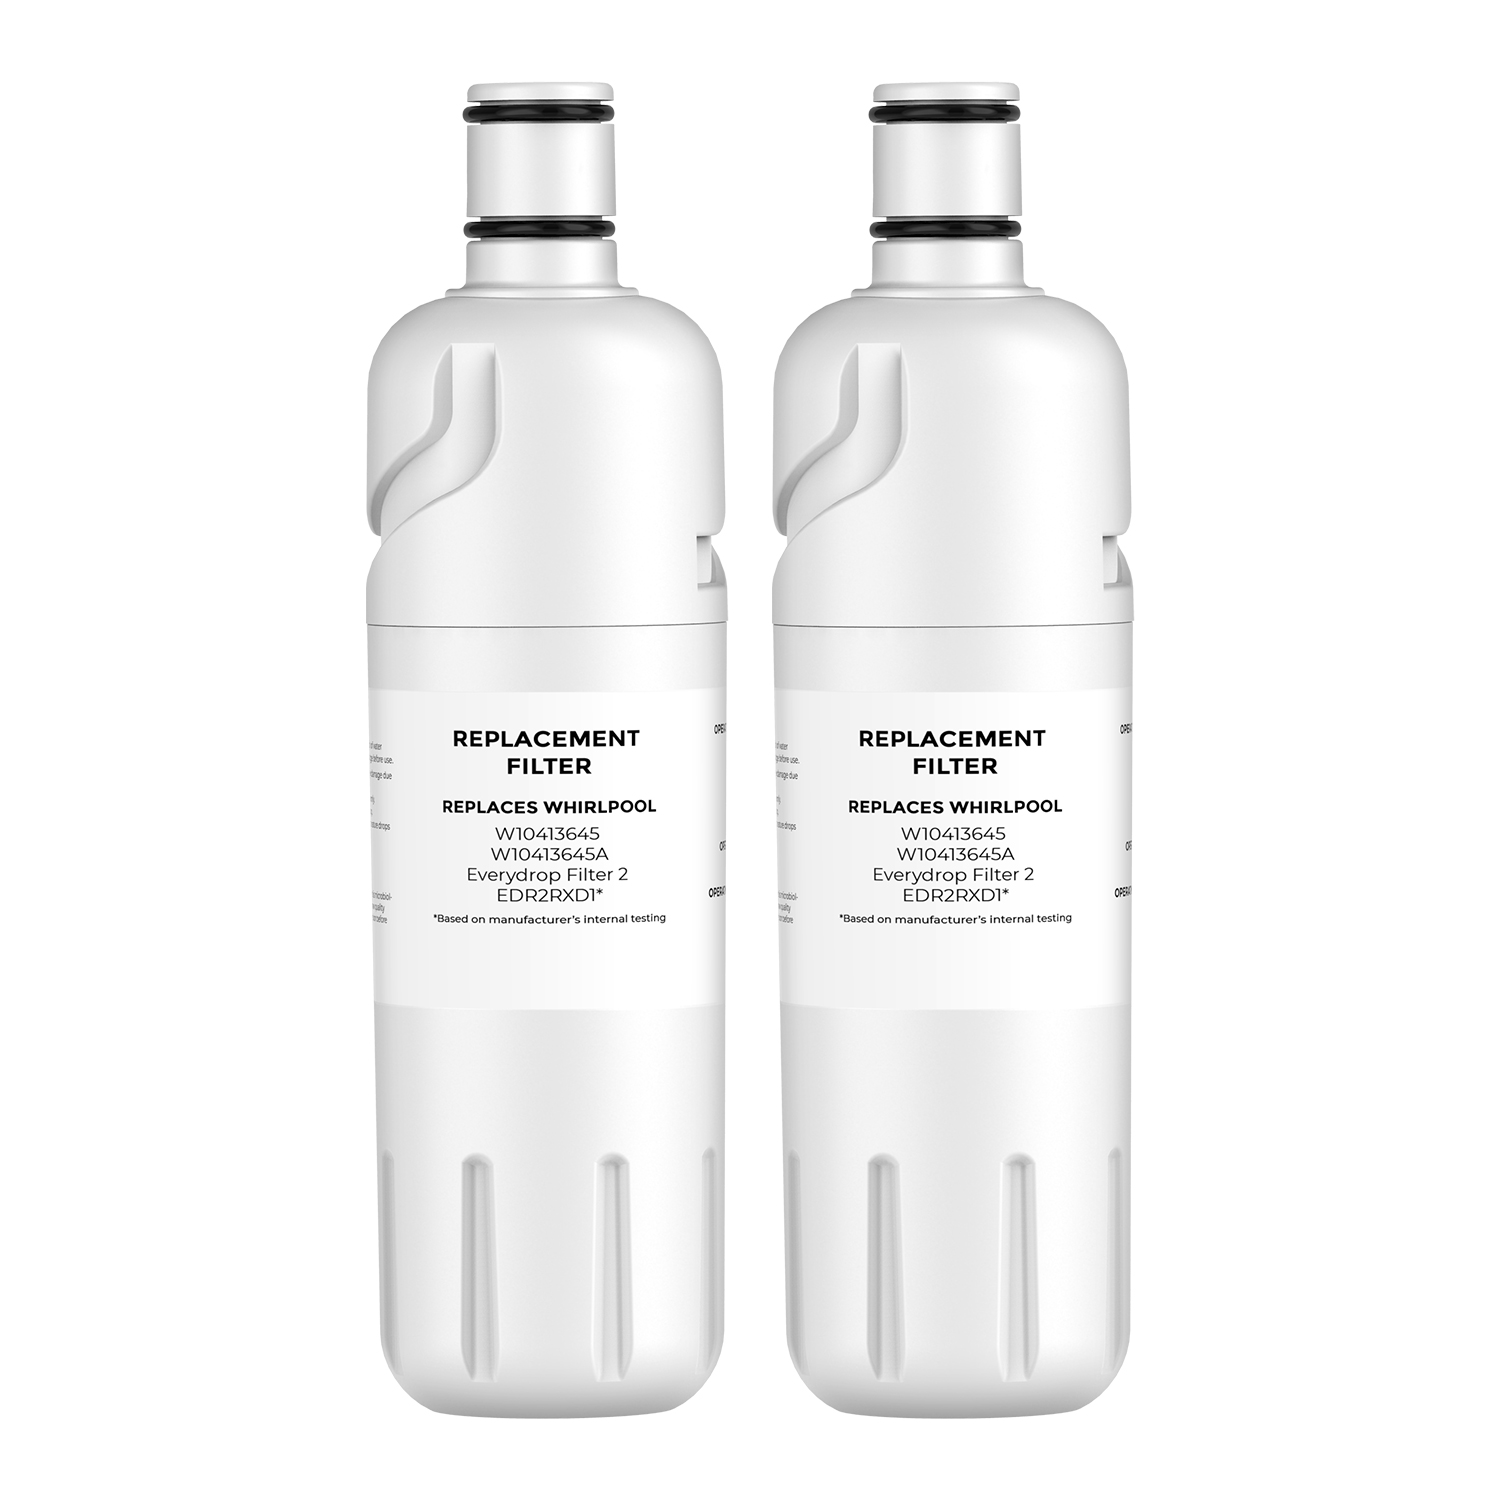 Compatible EDR2RXD1,46-9082,W10413645,9082 refrigerator water filter 2 by Pzfilters 2PK